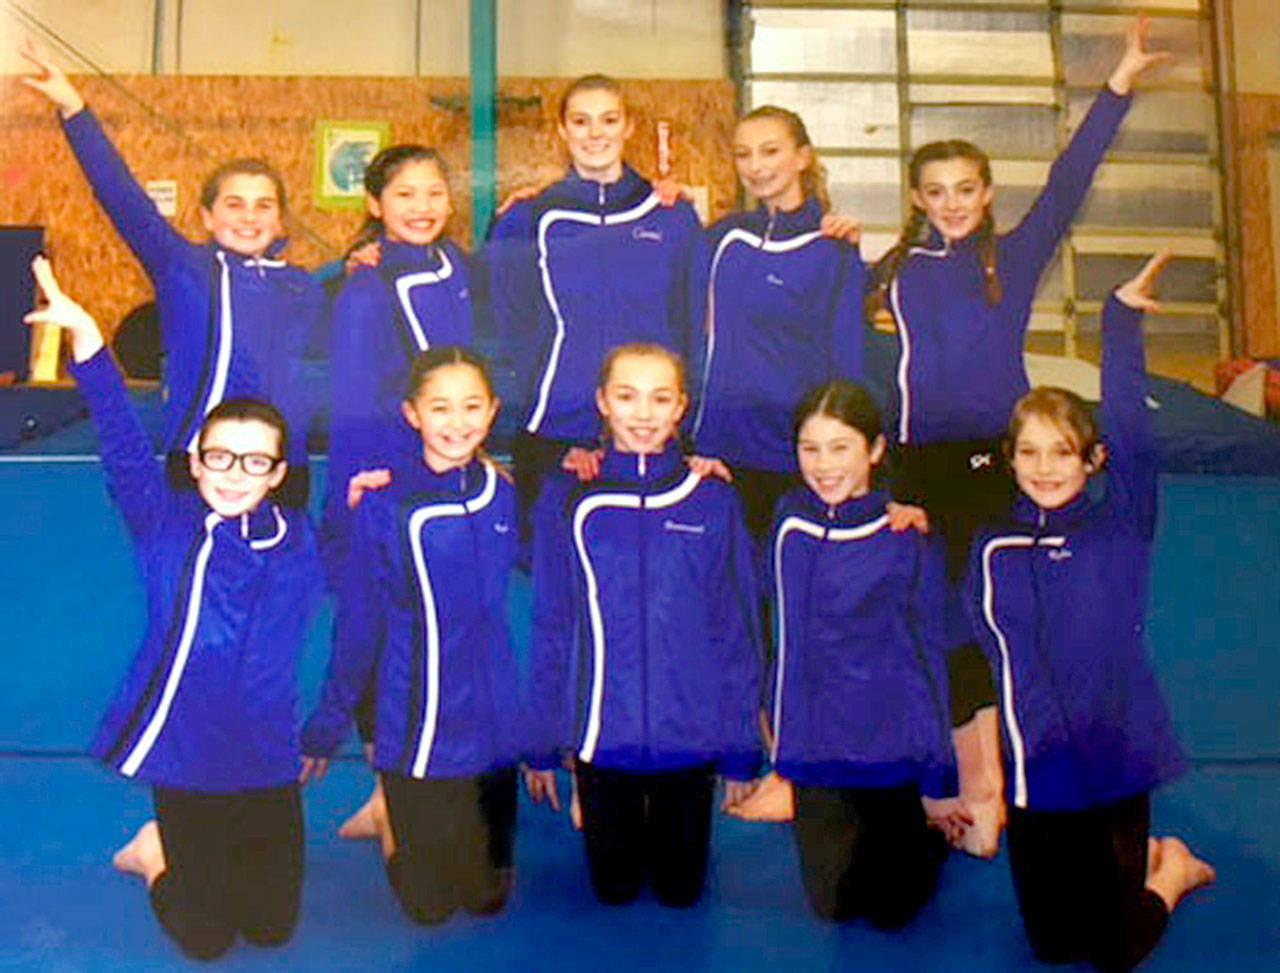 Klahhane Gymnasts brought back gold and silver medals at the Washington Xcel State Championships this past weekend. From left, back row, are Lainy Vig, MeiYing Harper-Smith; Cassii Middlestead, Emma Sharp and Danica Pierson. From left, front row, are Jessamyn Schindler, Kayli Sexton, Susannah Sharp, Sadie Miller and Rylee Evans.